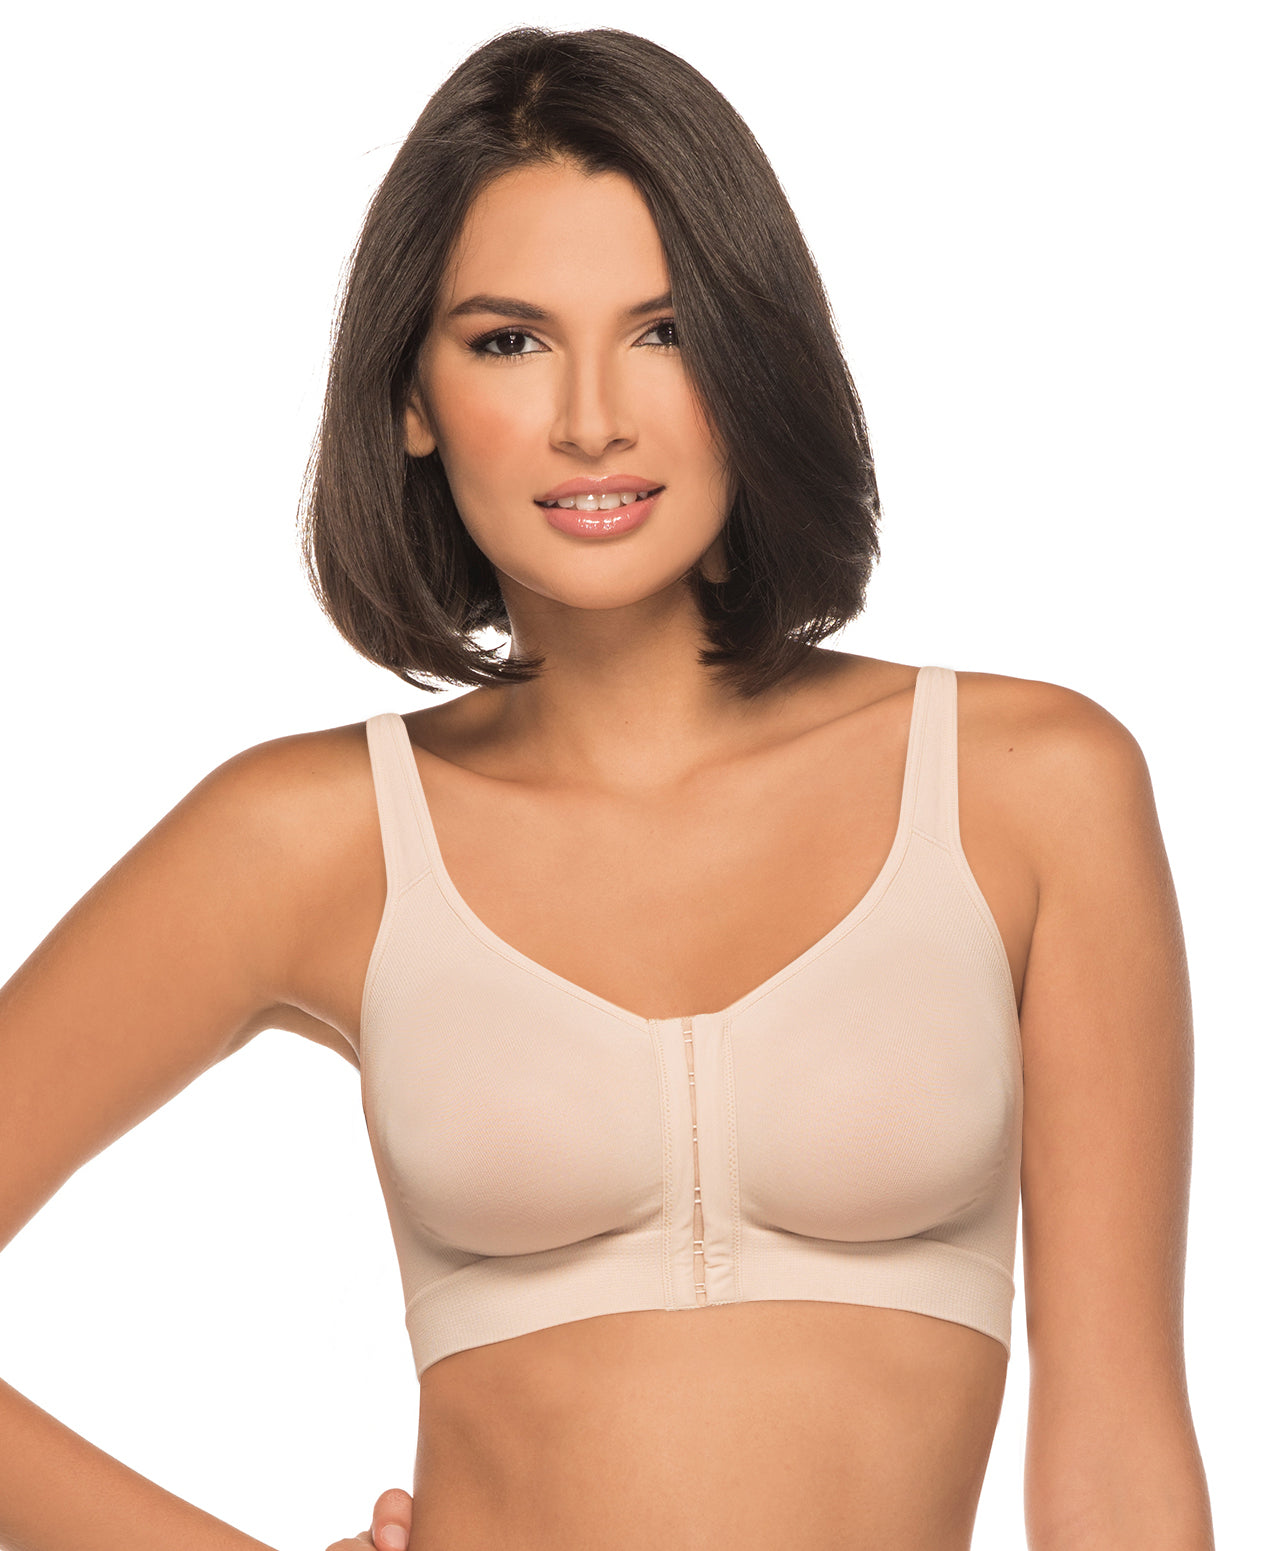 Wholesale medical bras For Supportive Underwear 